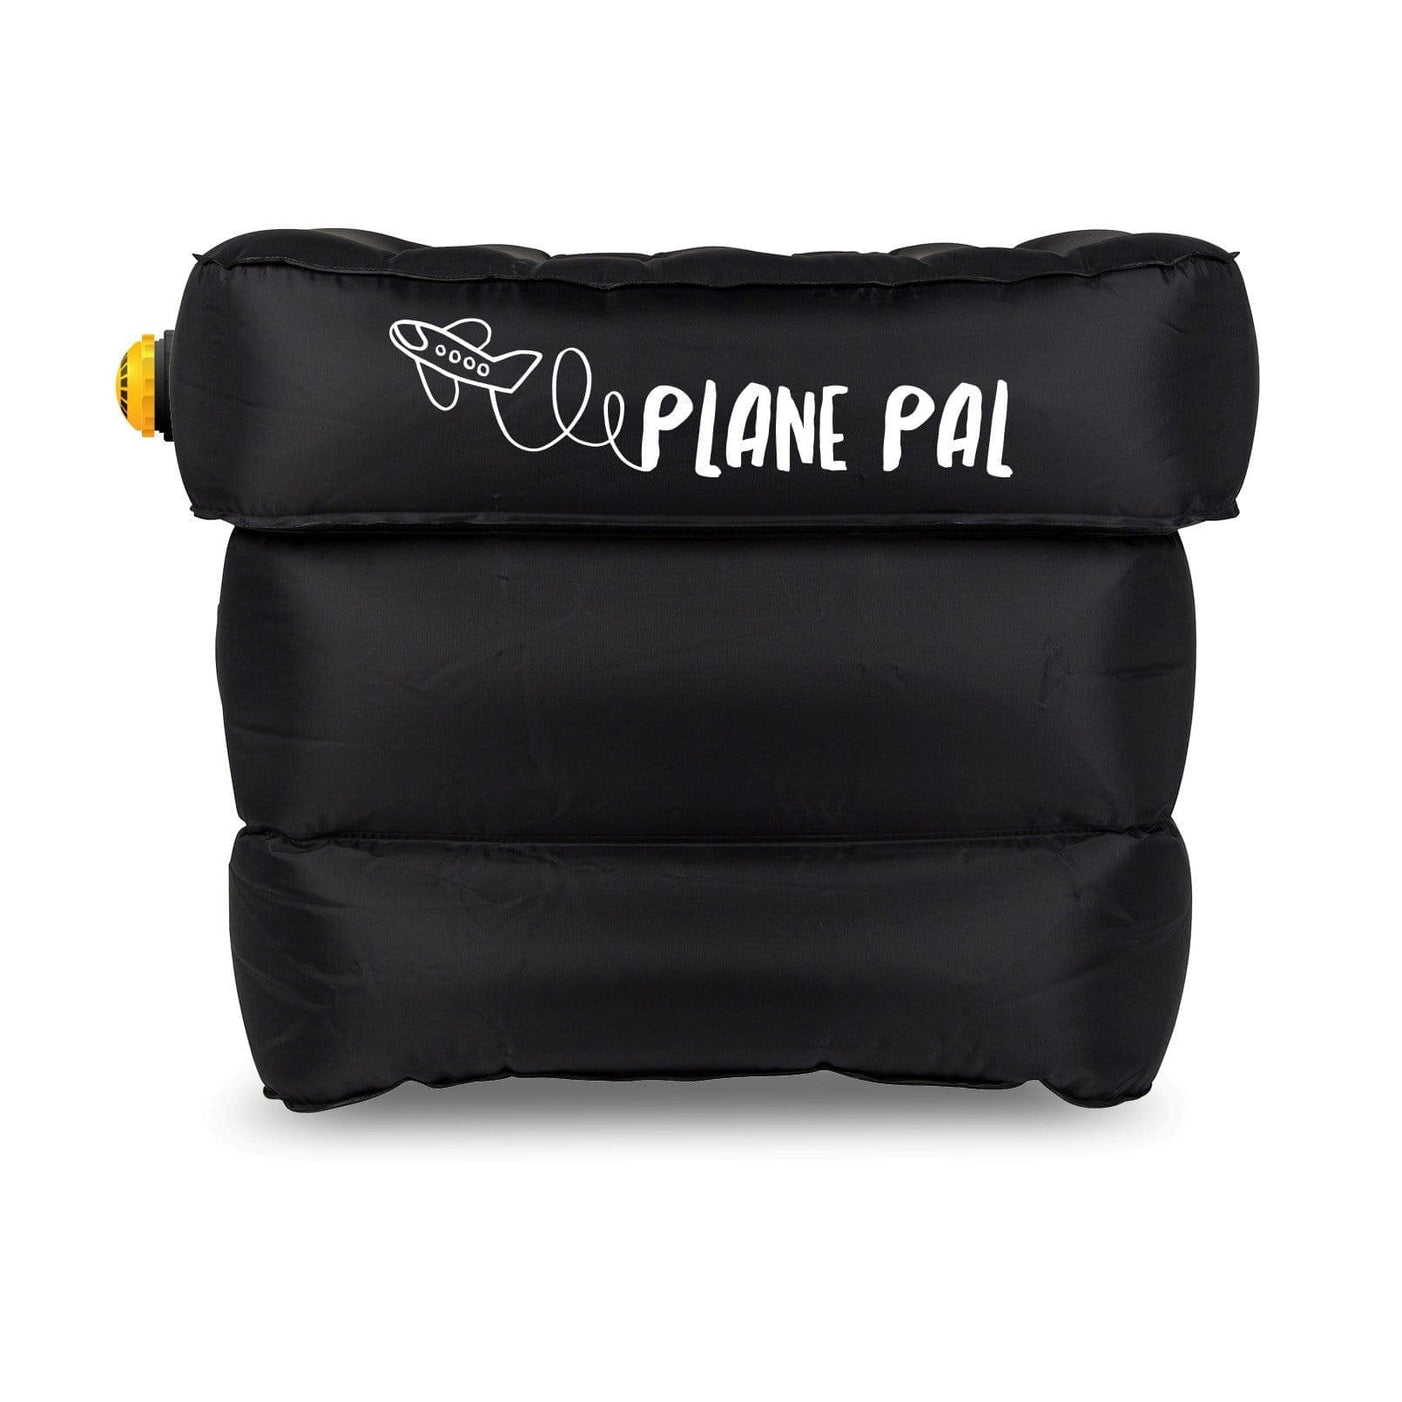 Plane Pal - The Airplane Seat Extender - Full Kit (With Pump).